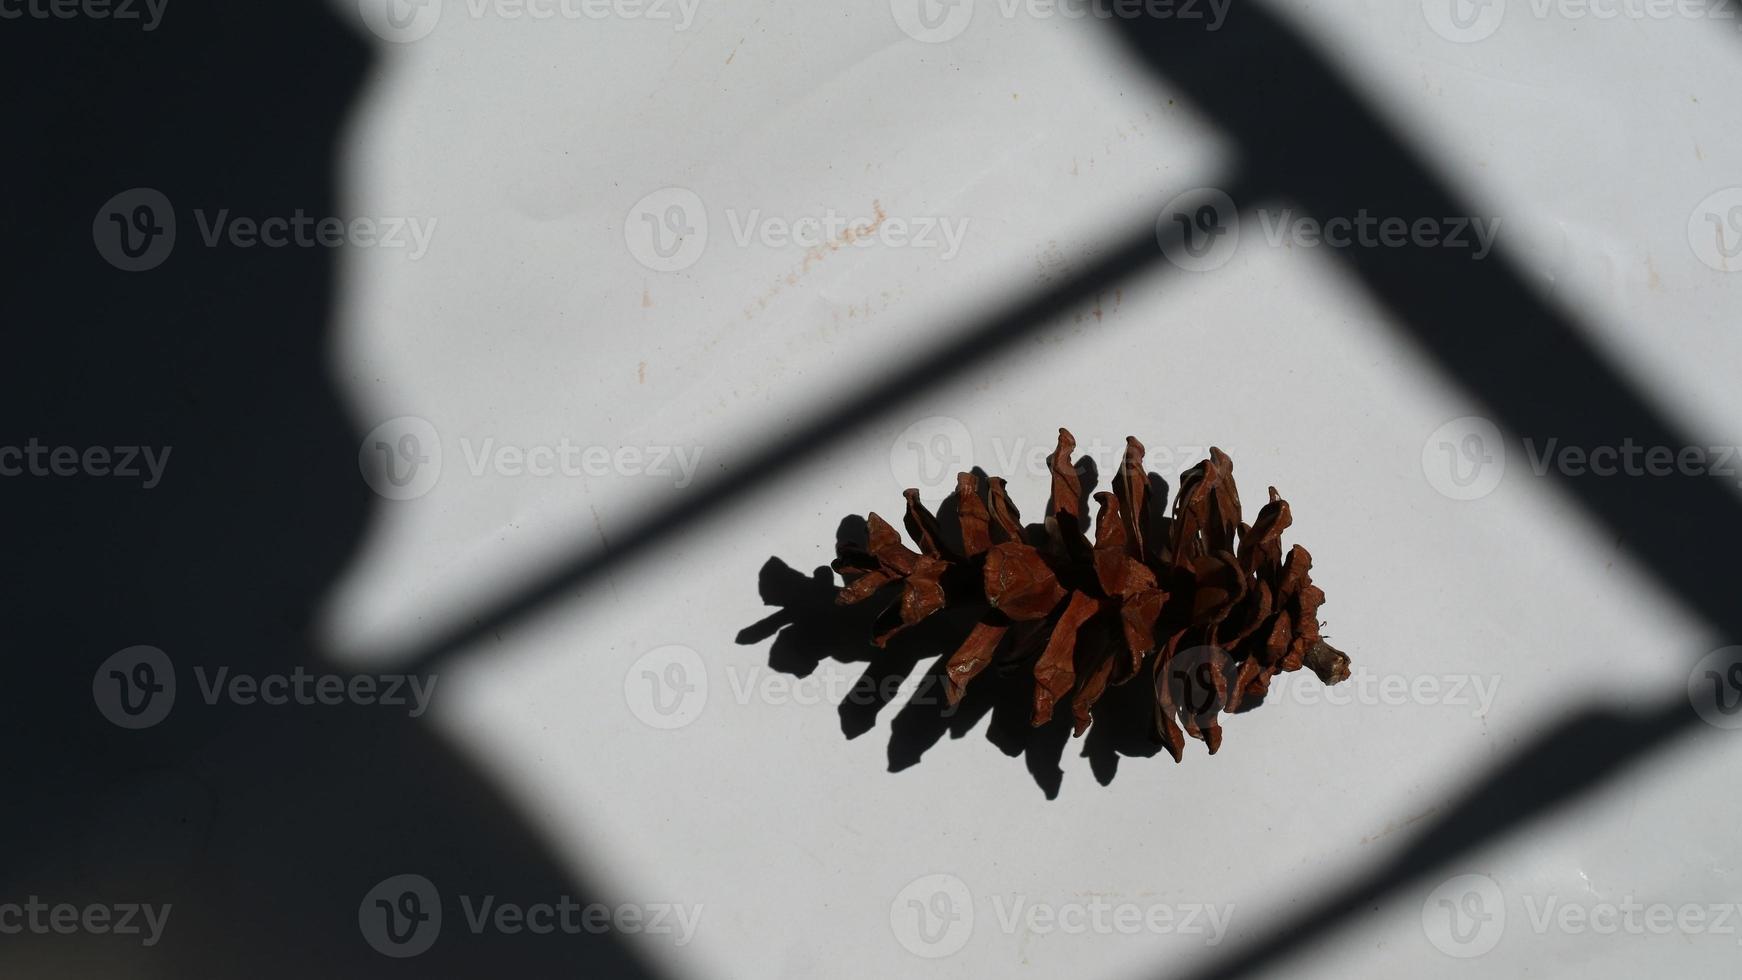 Dried pine flowers can make photo accessories